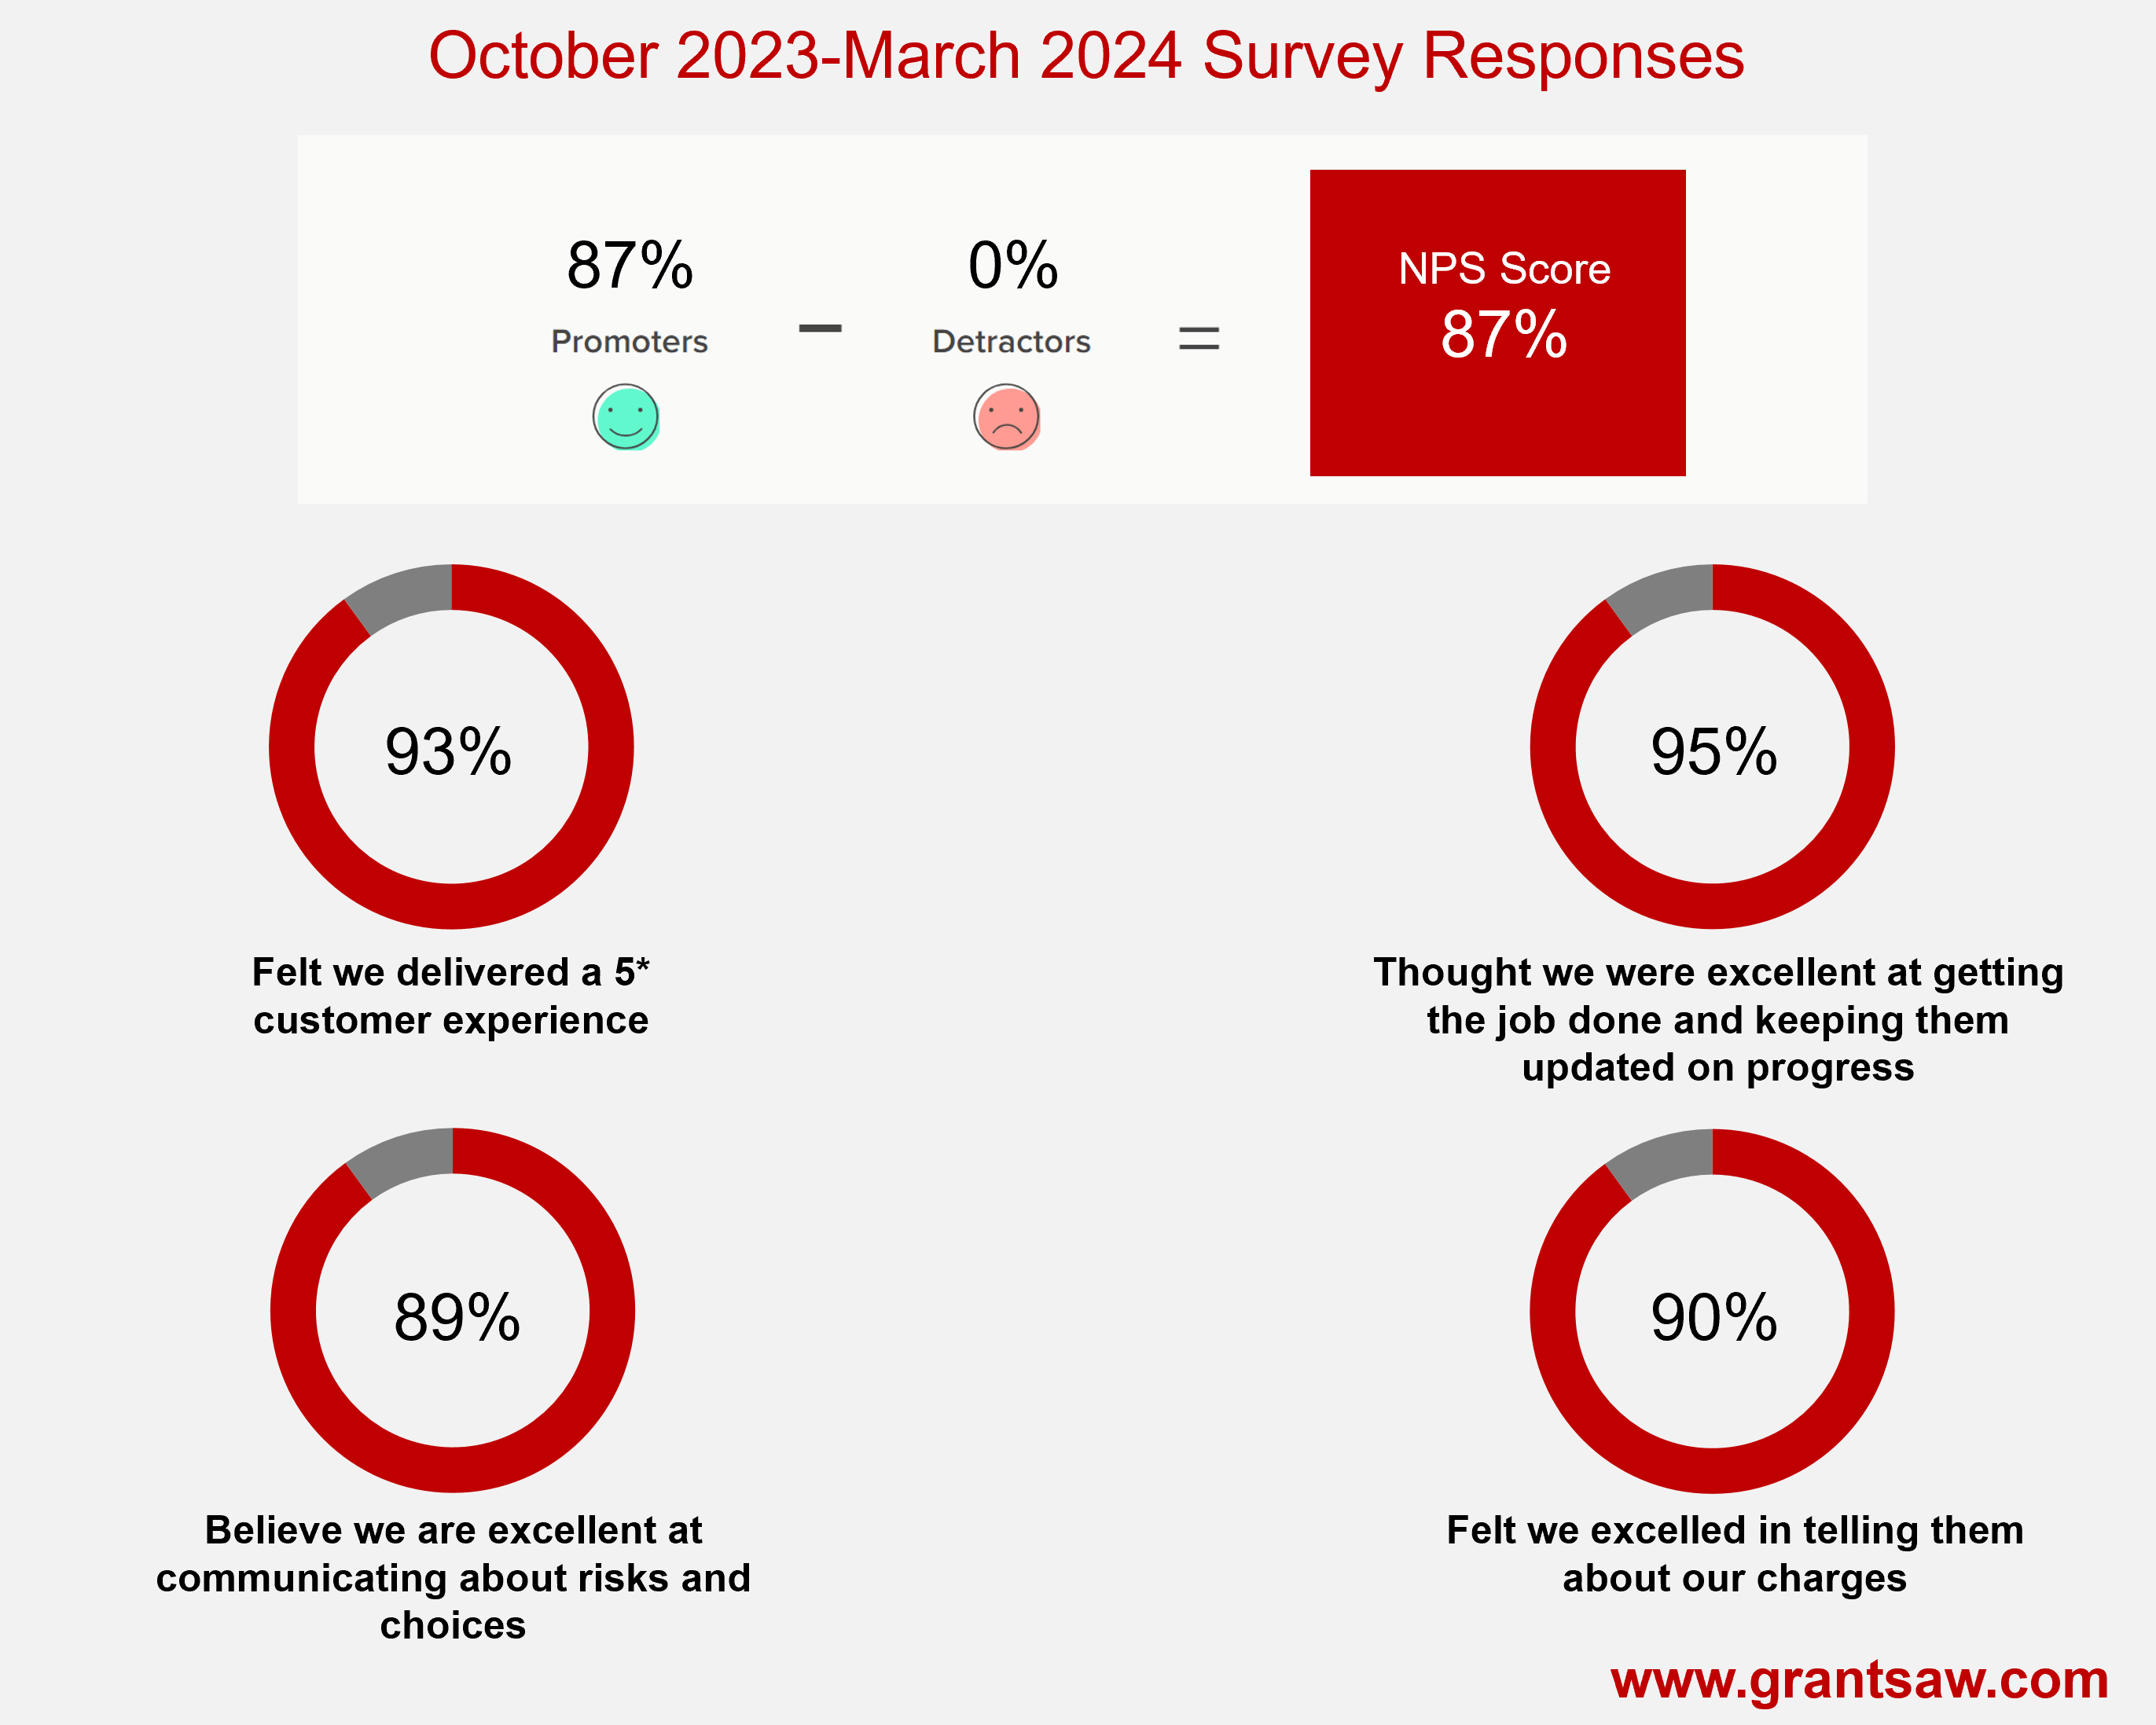 Grant Saw survey results